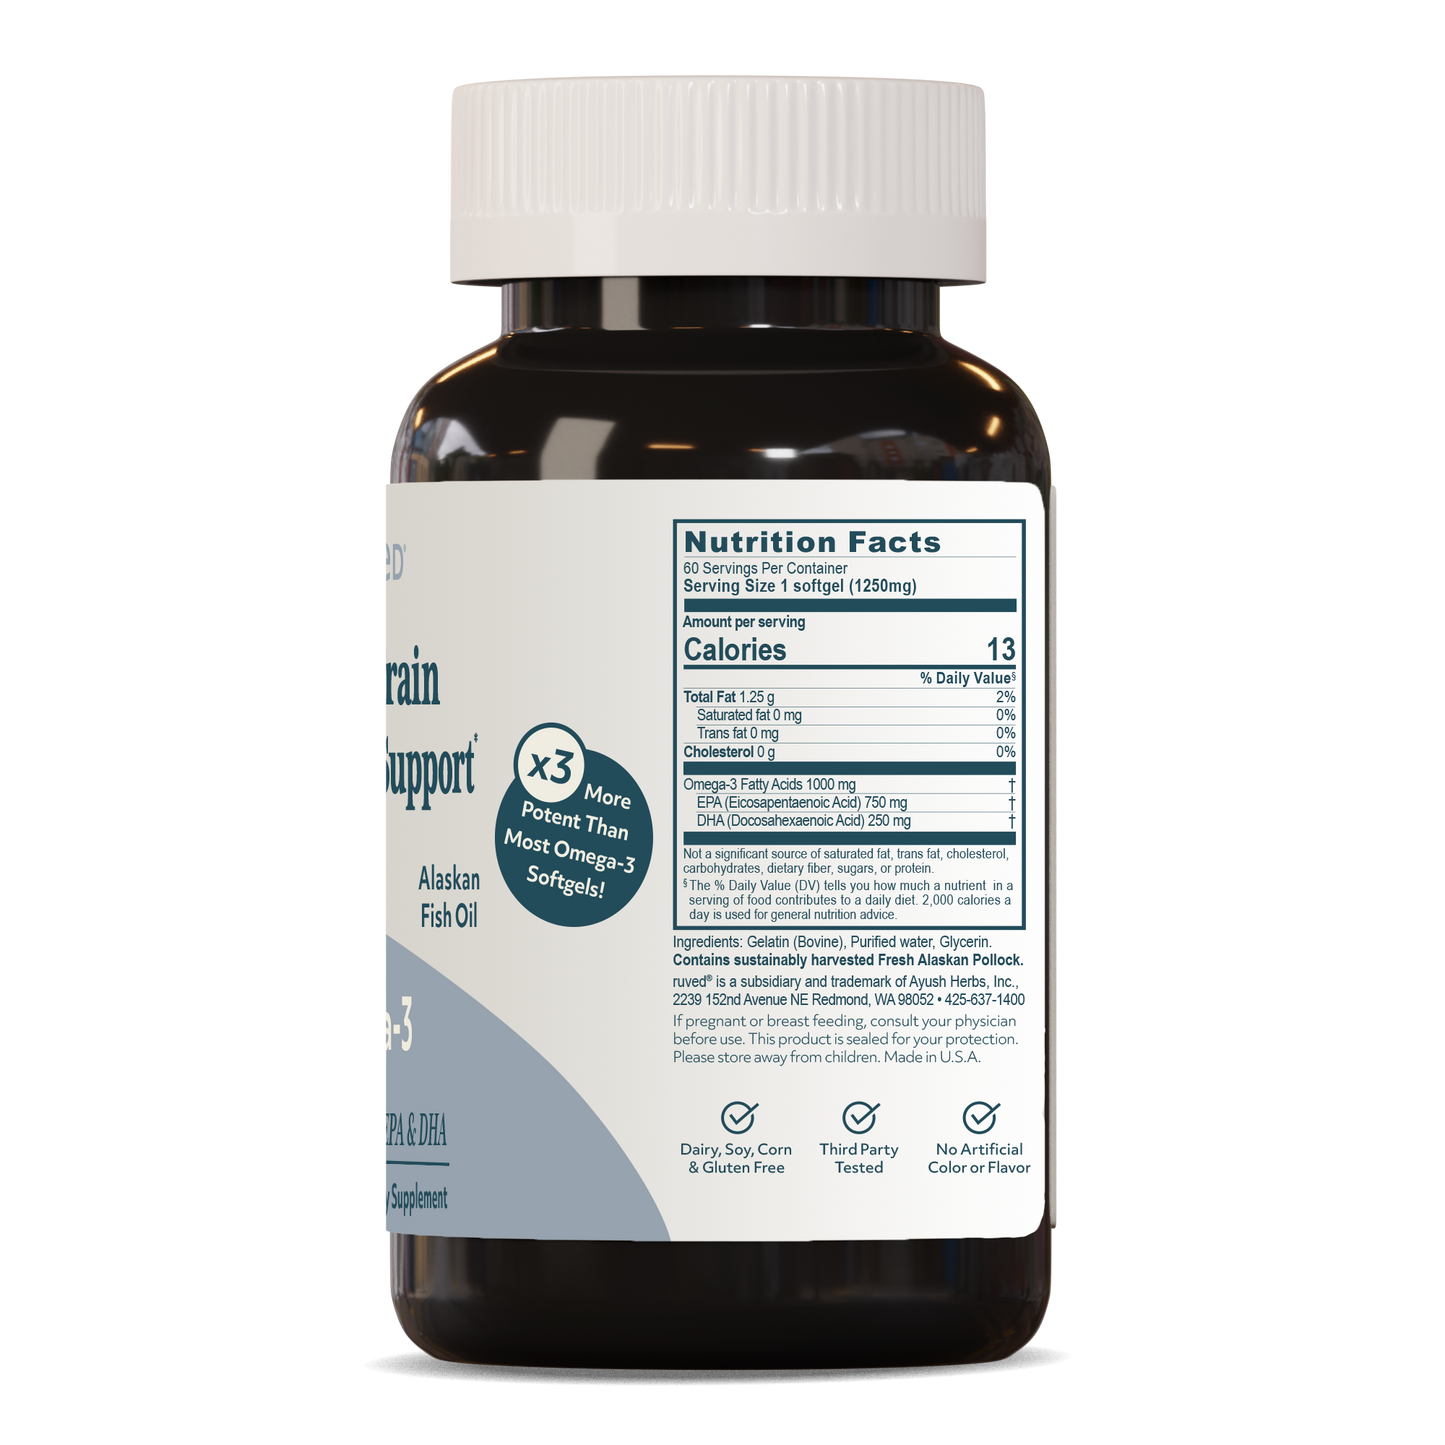 Omega-3 Softgels Supplement Facts Side - Essential Fatty Acid Supplement, 60 Softgels, Supports Heart Health and Brain Function.